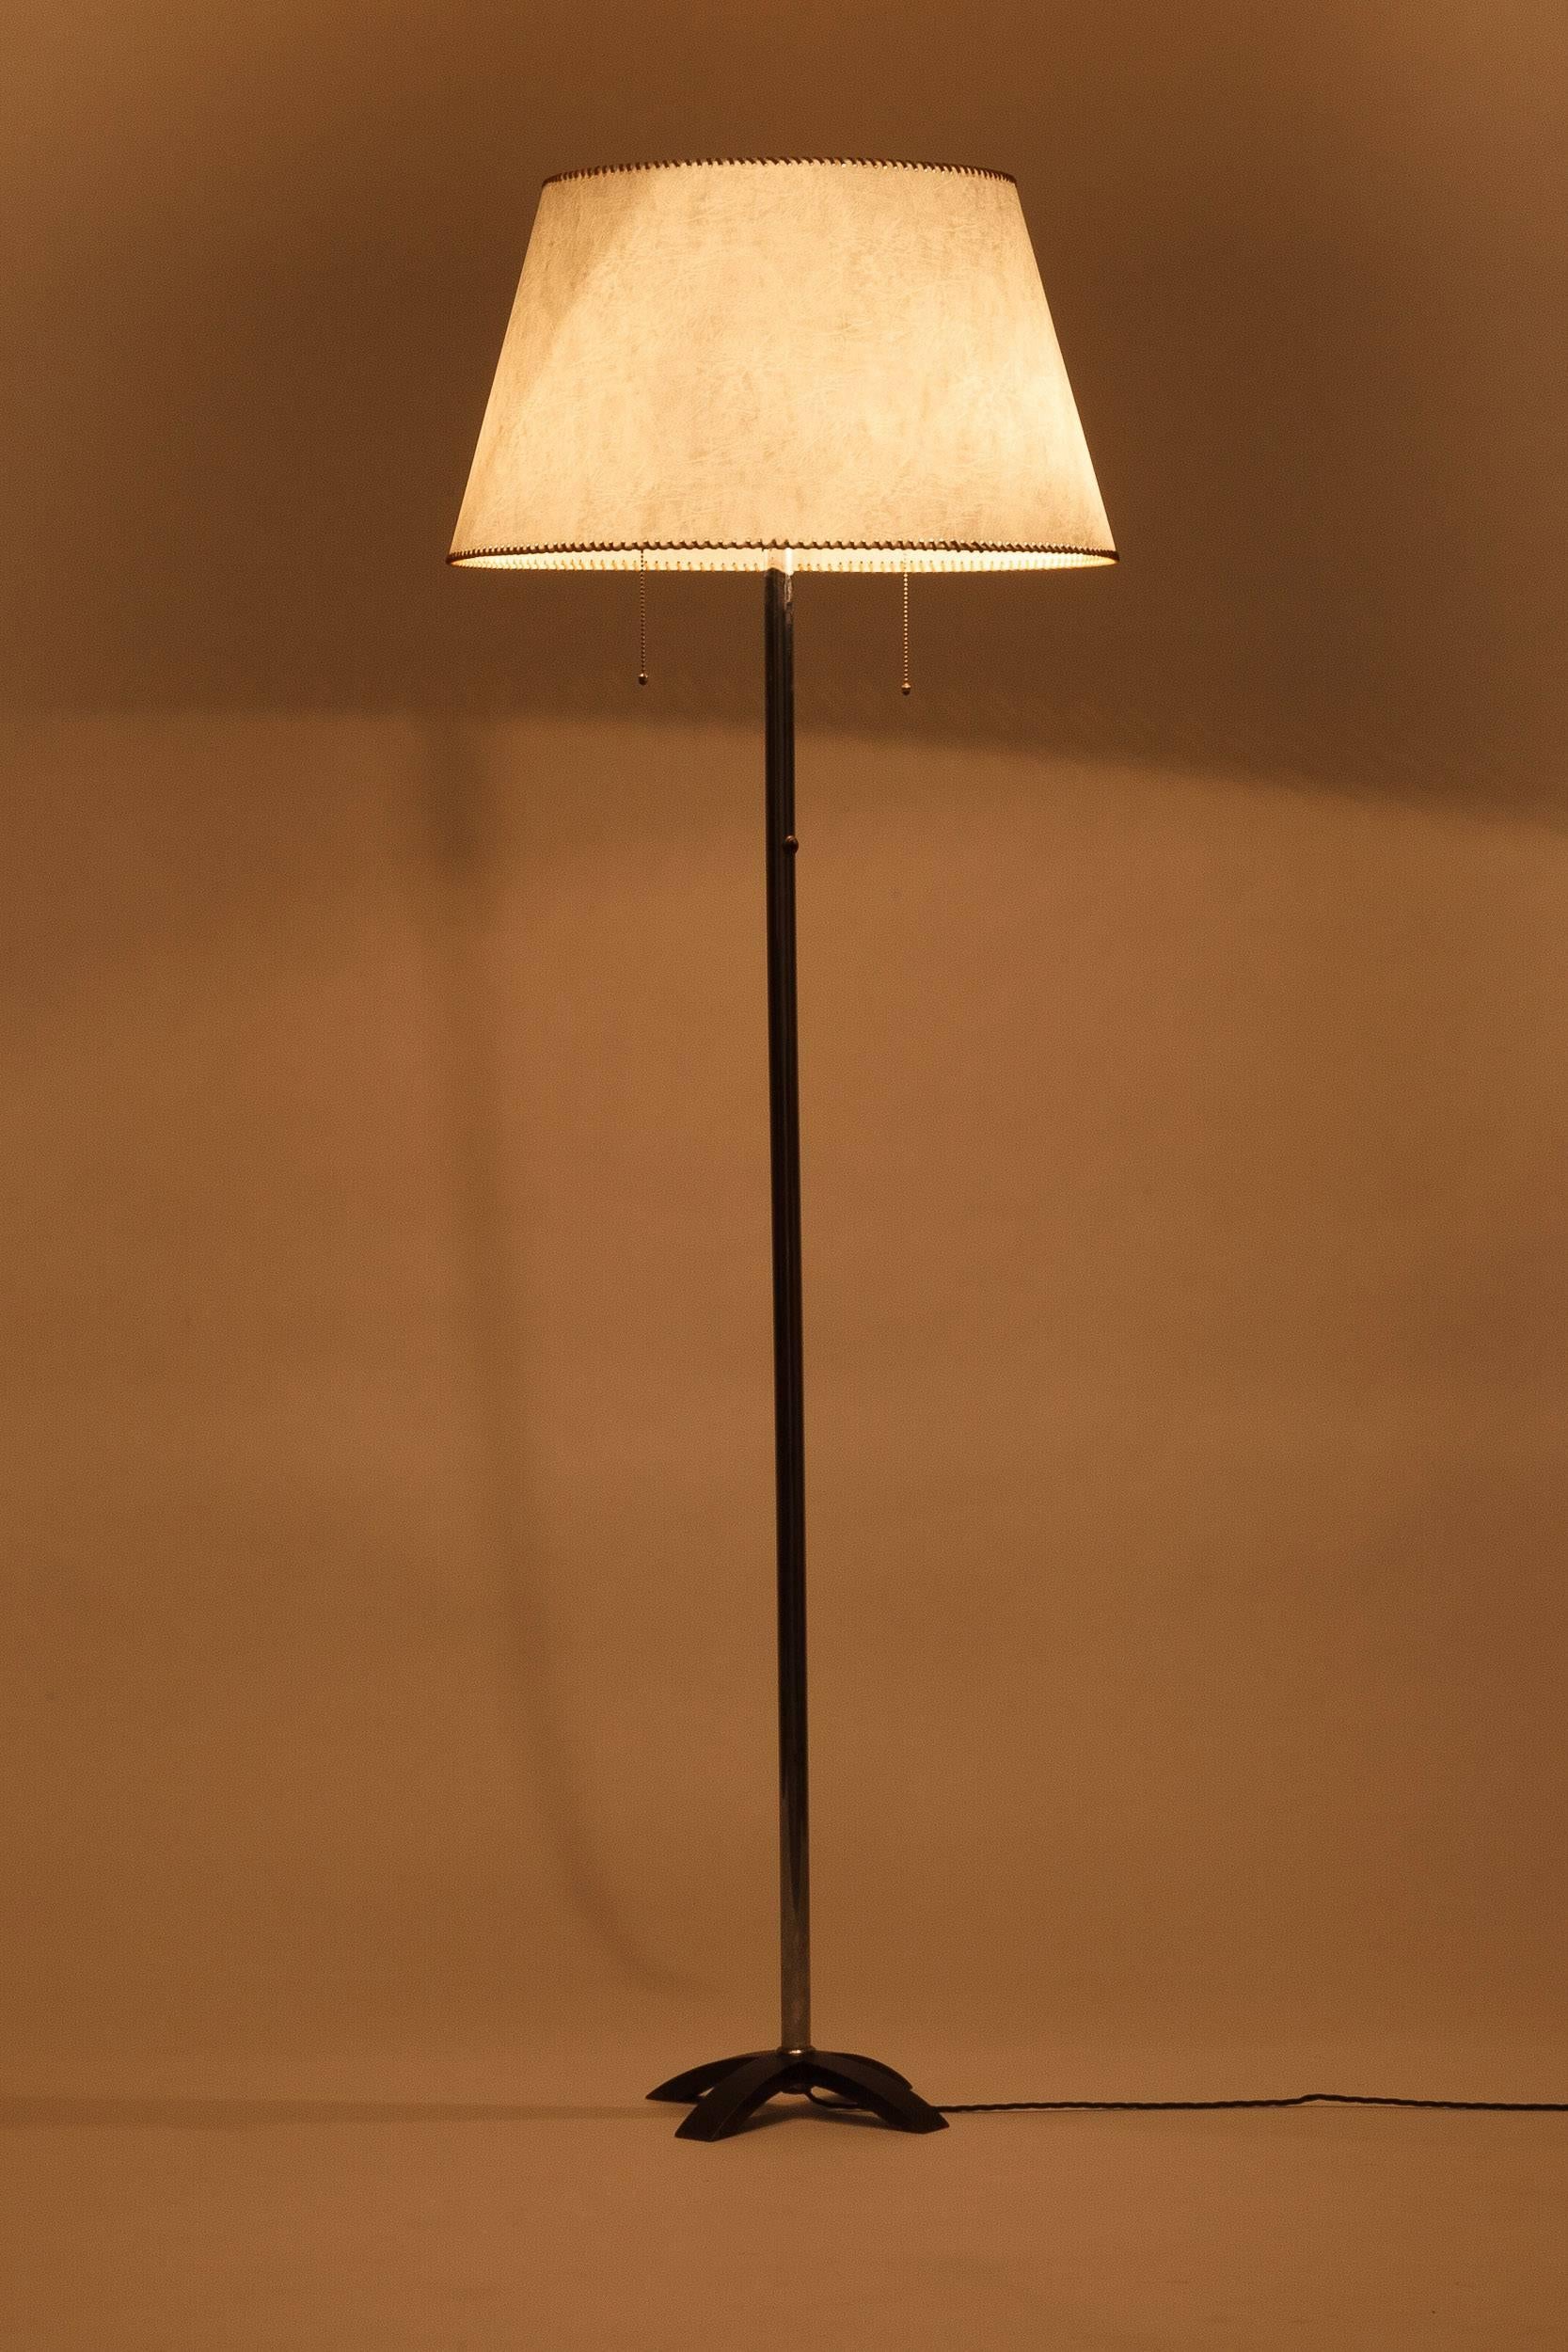 Beautifully worked floor lamp manufactured between 1925-1935 in Germany, evident Bauhaus shape. Stem made of stainless steel with Bakelite shift, foot of cast iron and bucket of white metal, all original components. The lamp is newly wired, new